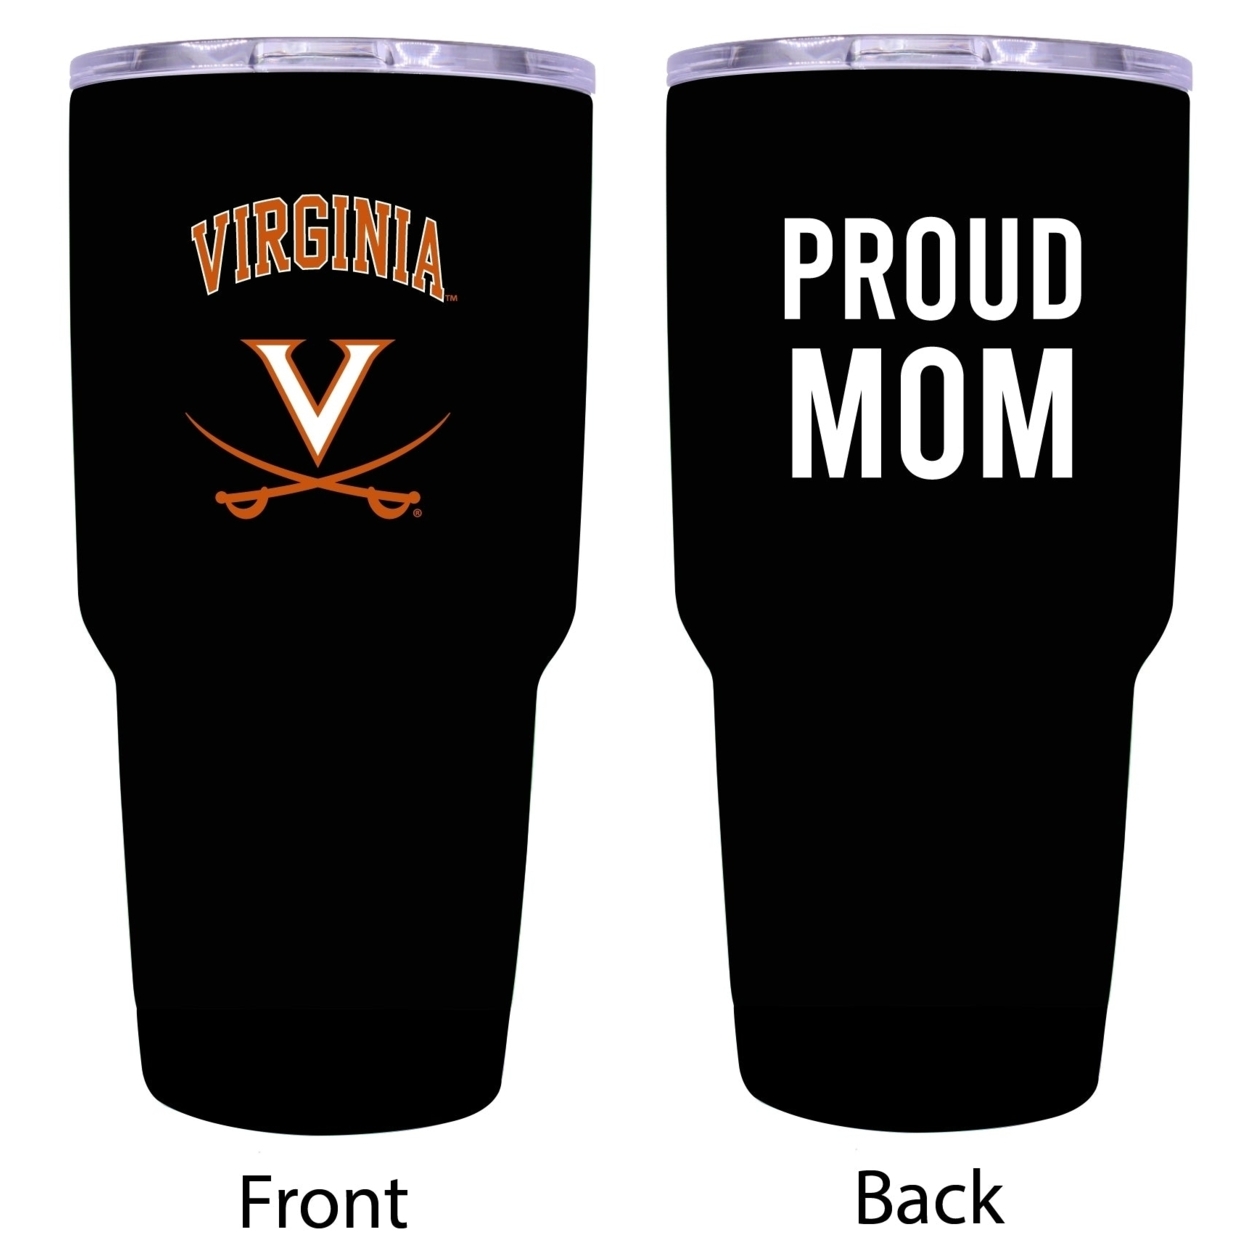 R And R Imports Virginia Cavaliers Proud Mom 24 Oz Insulated Stainless Steel Tumblers Black.